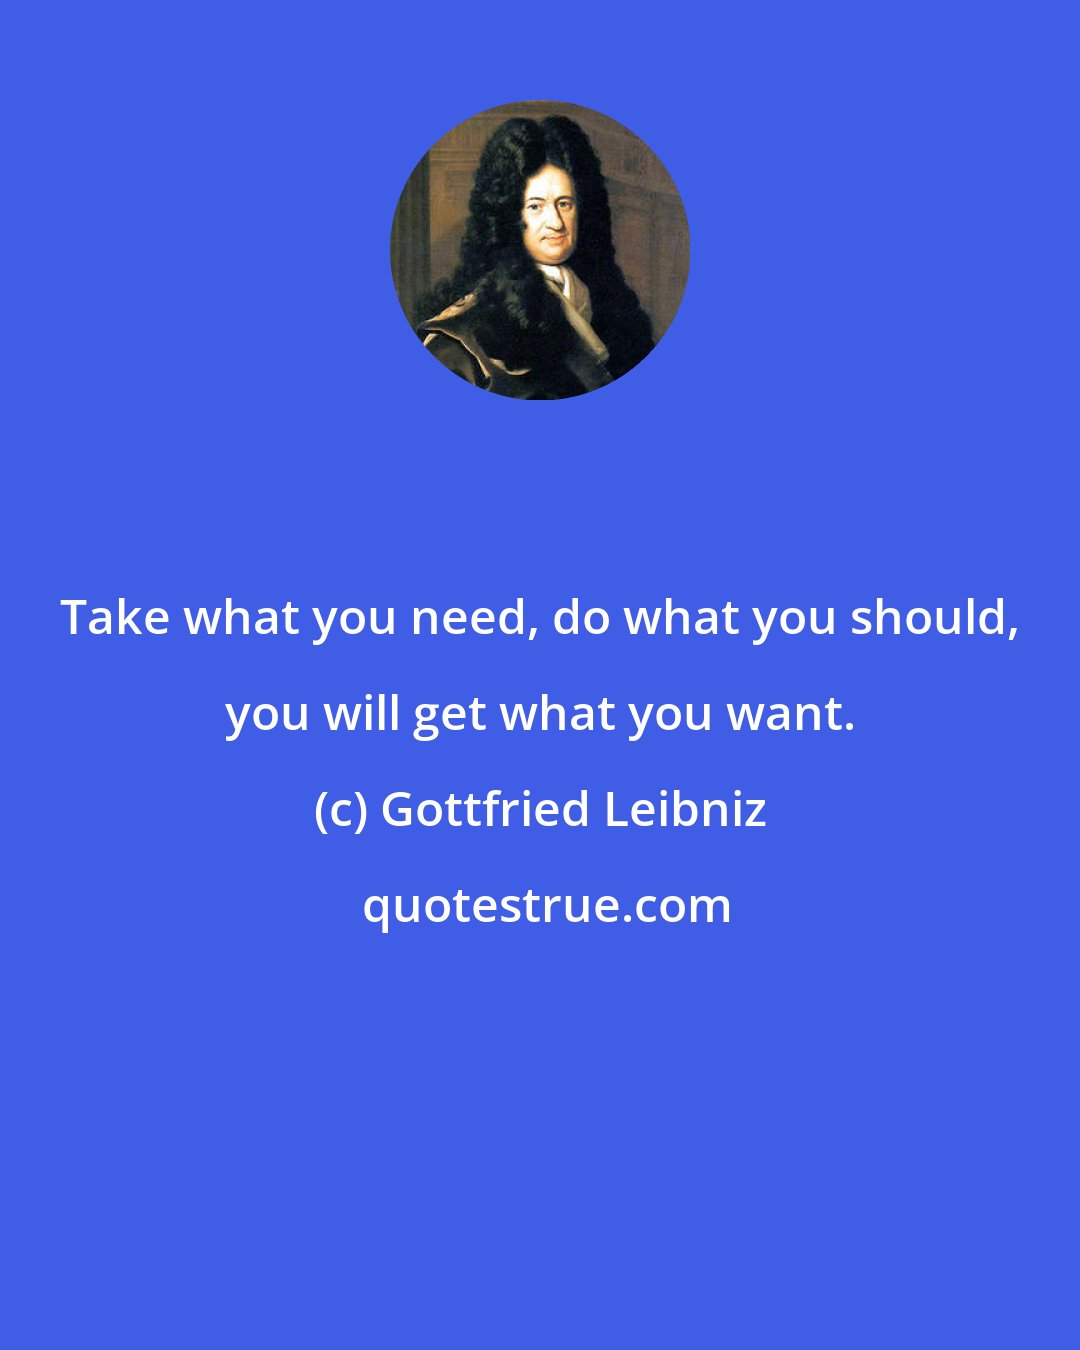 Gottfried Leibniz: Take what you need, do what you should, you will get what you want.